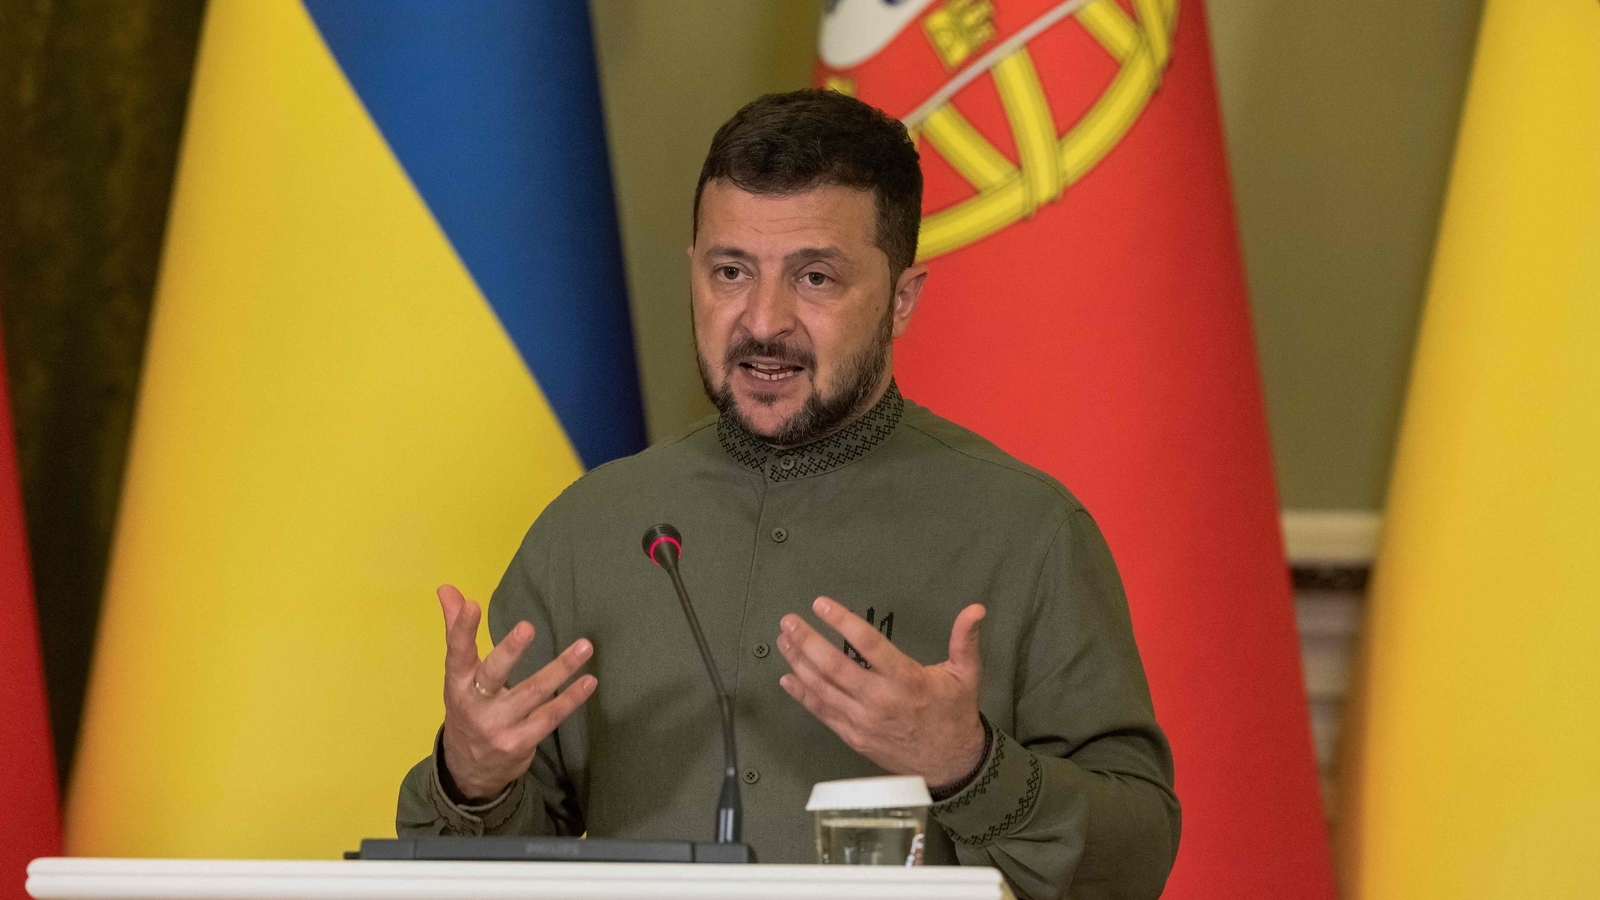 Ukraine had 'nothing to do' with Wagner chief's plane crash: Zelensky